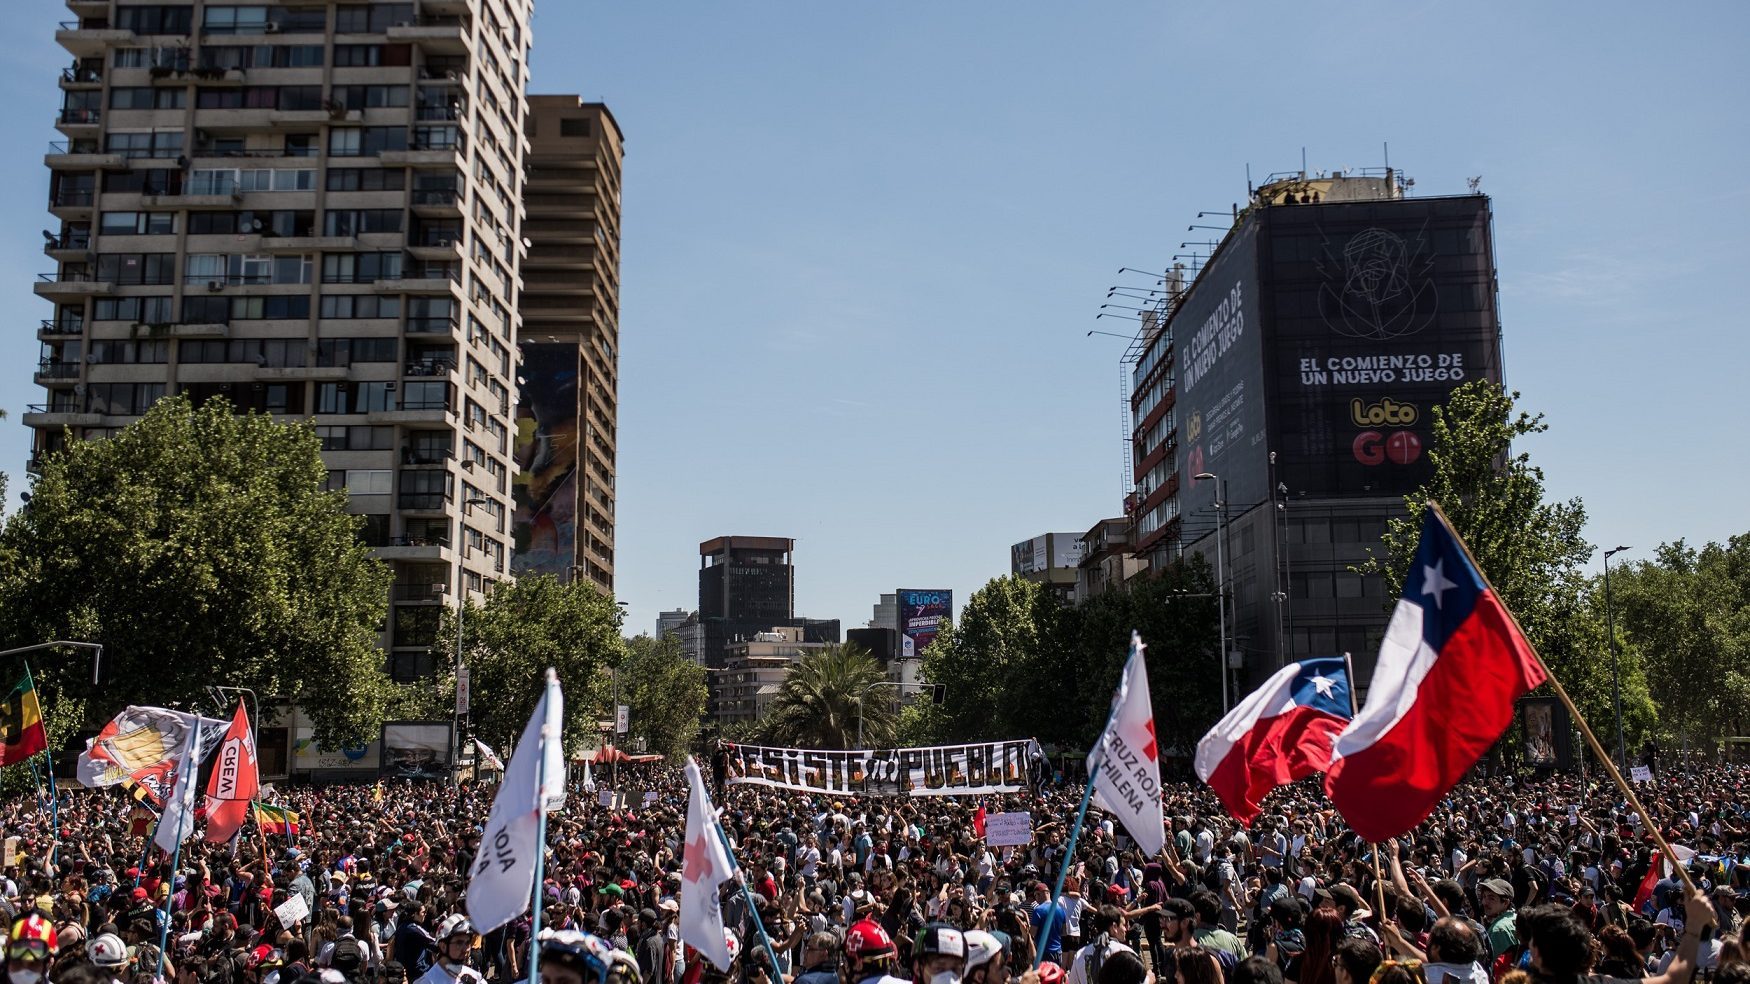 Big number of people marching through the streets of Santiago, Chile in 2019.